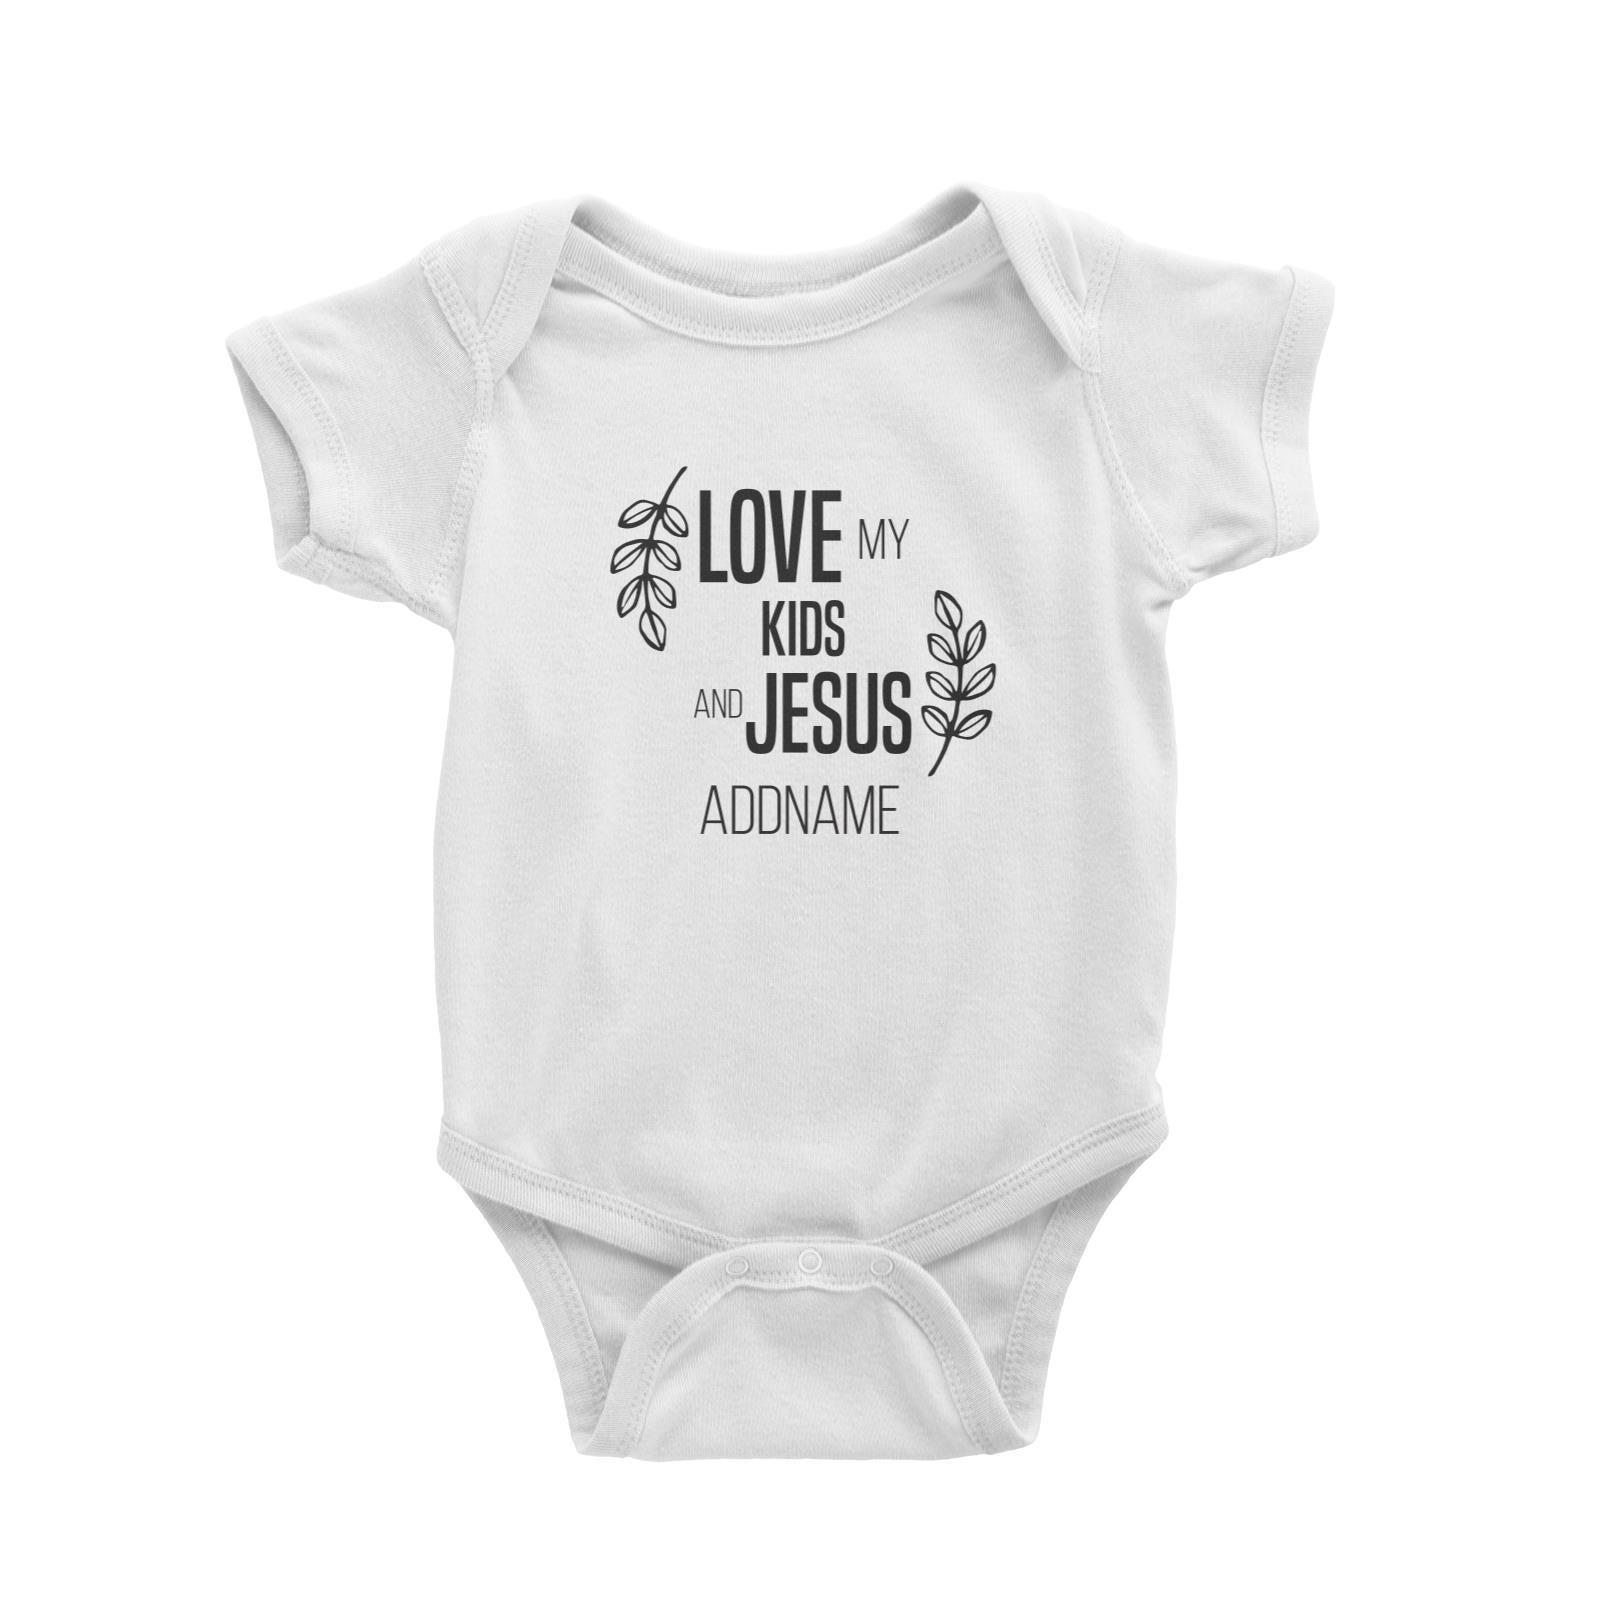 Christian Series Love My Kids And Jesus Addname Baby Romper